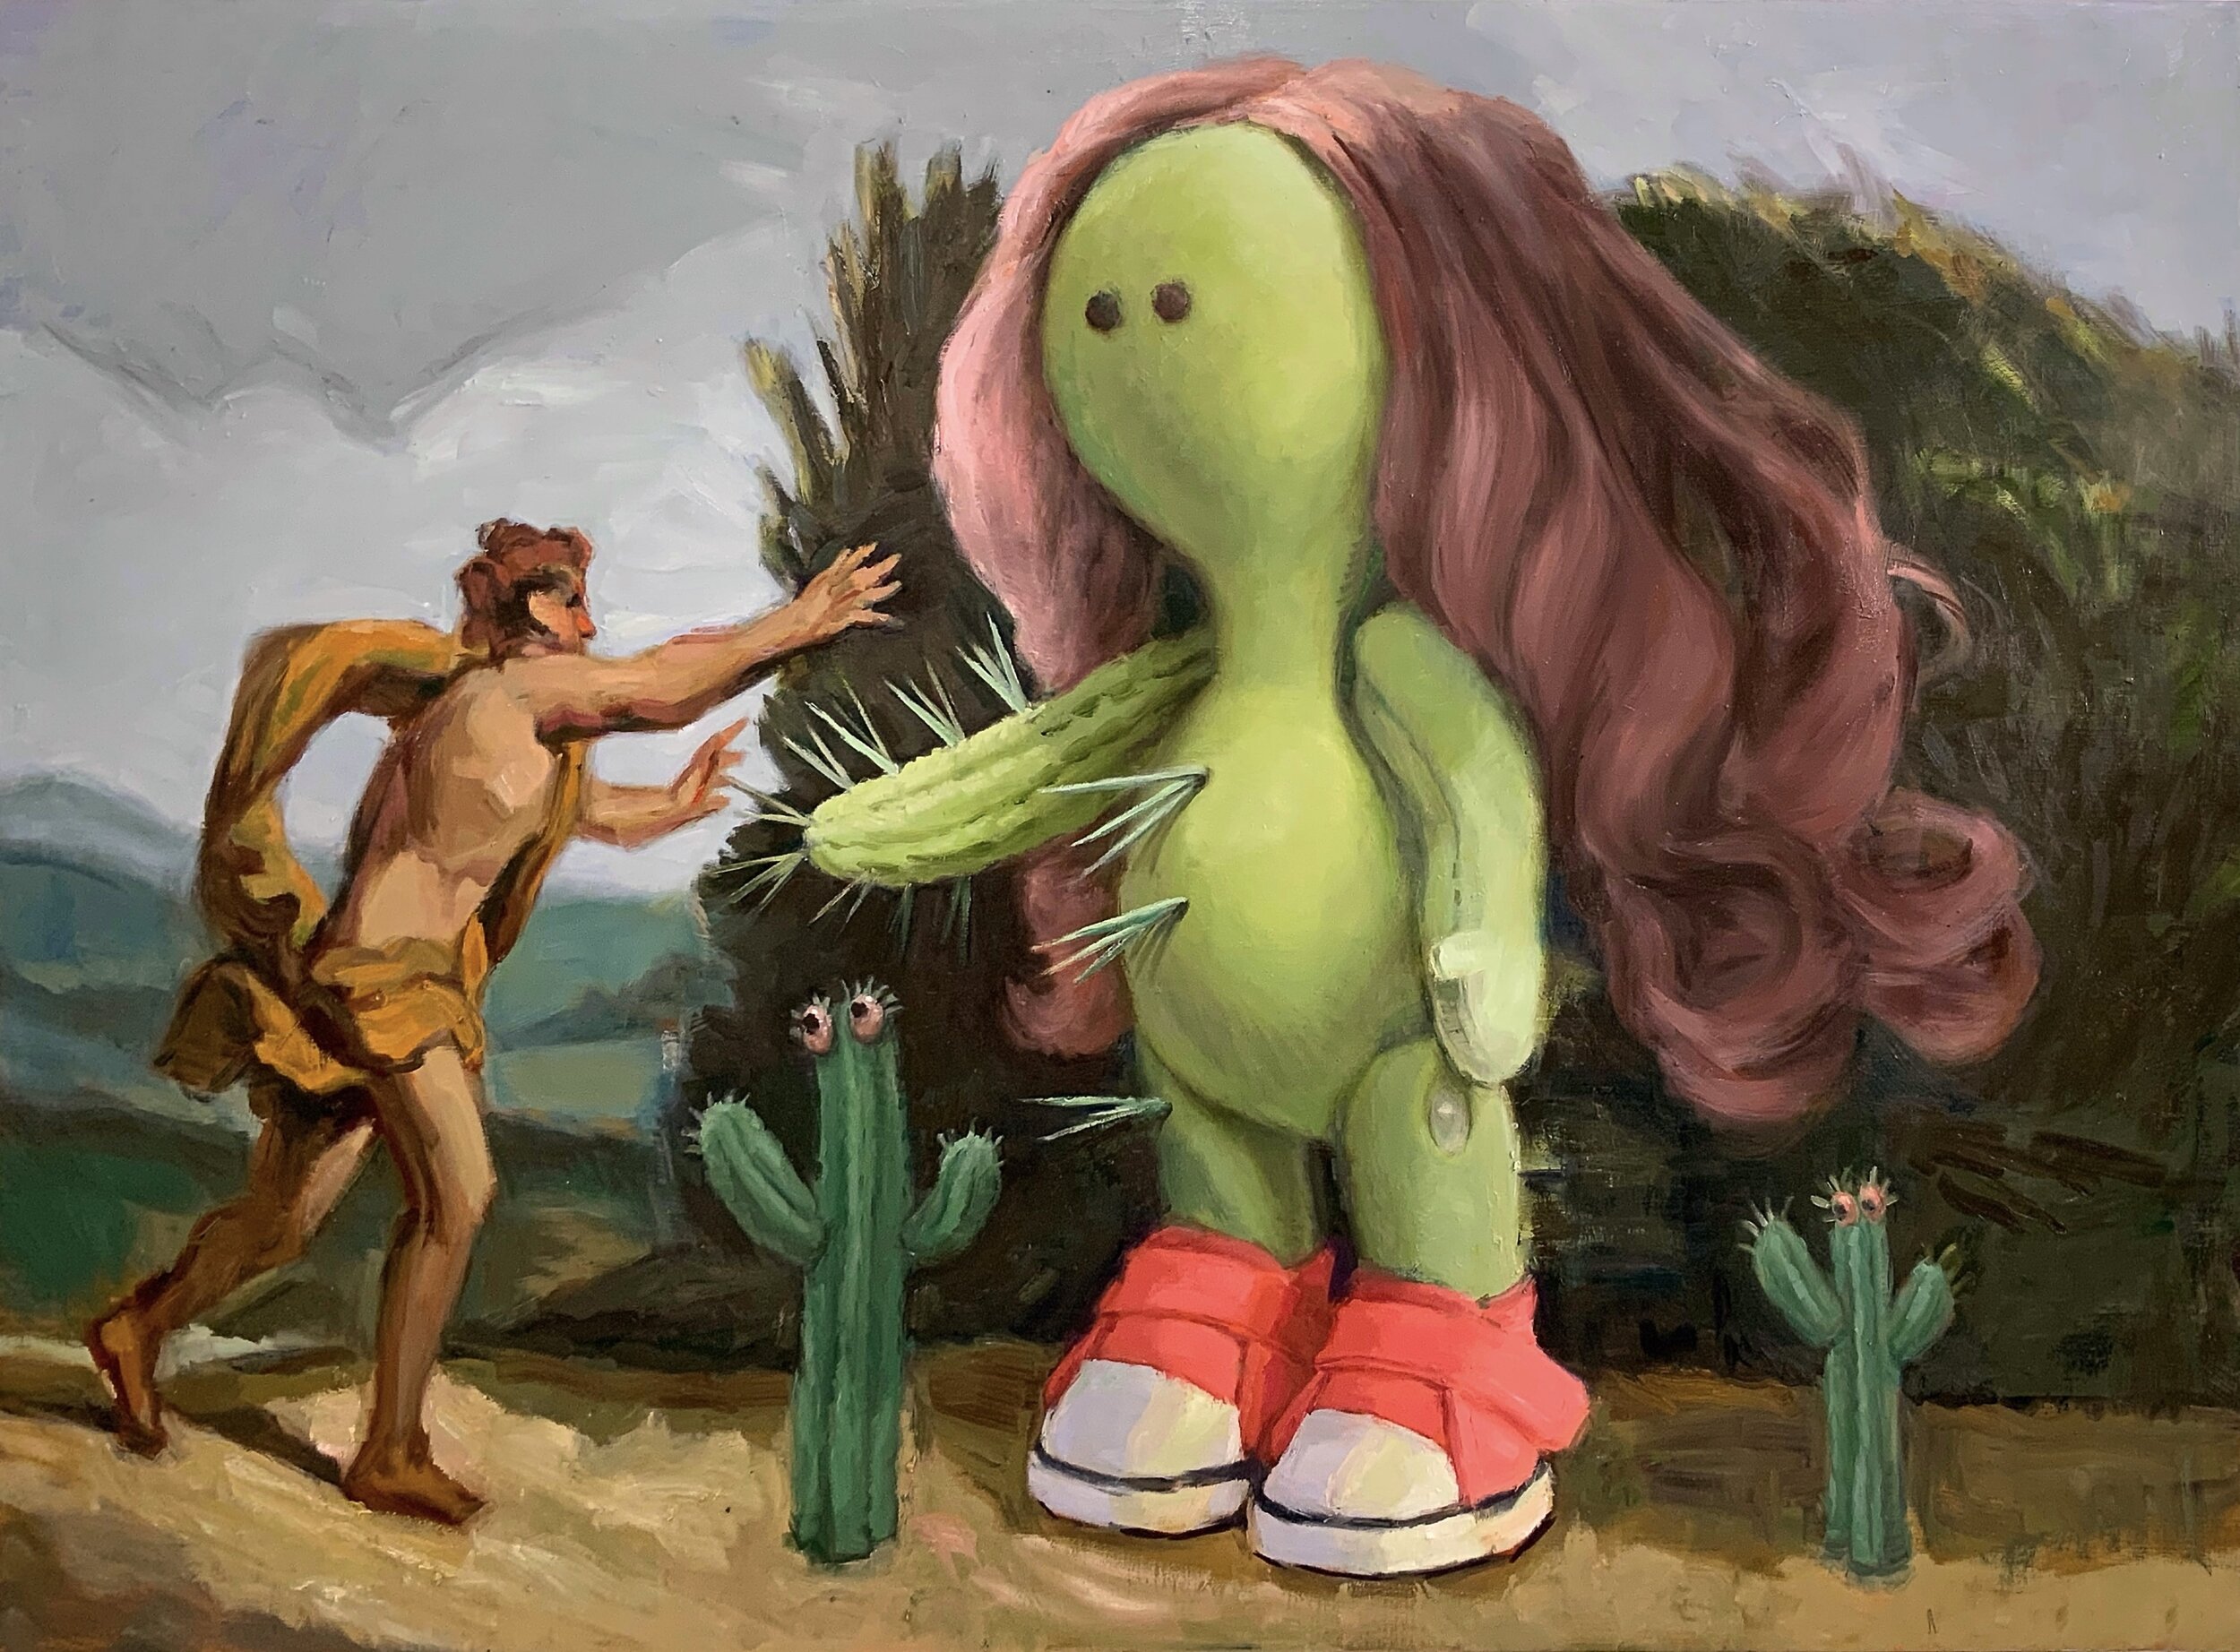 Cactus-Girl shows what she’s made of 120 x 170 cm, oil and enamel on linen 2021